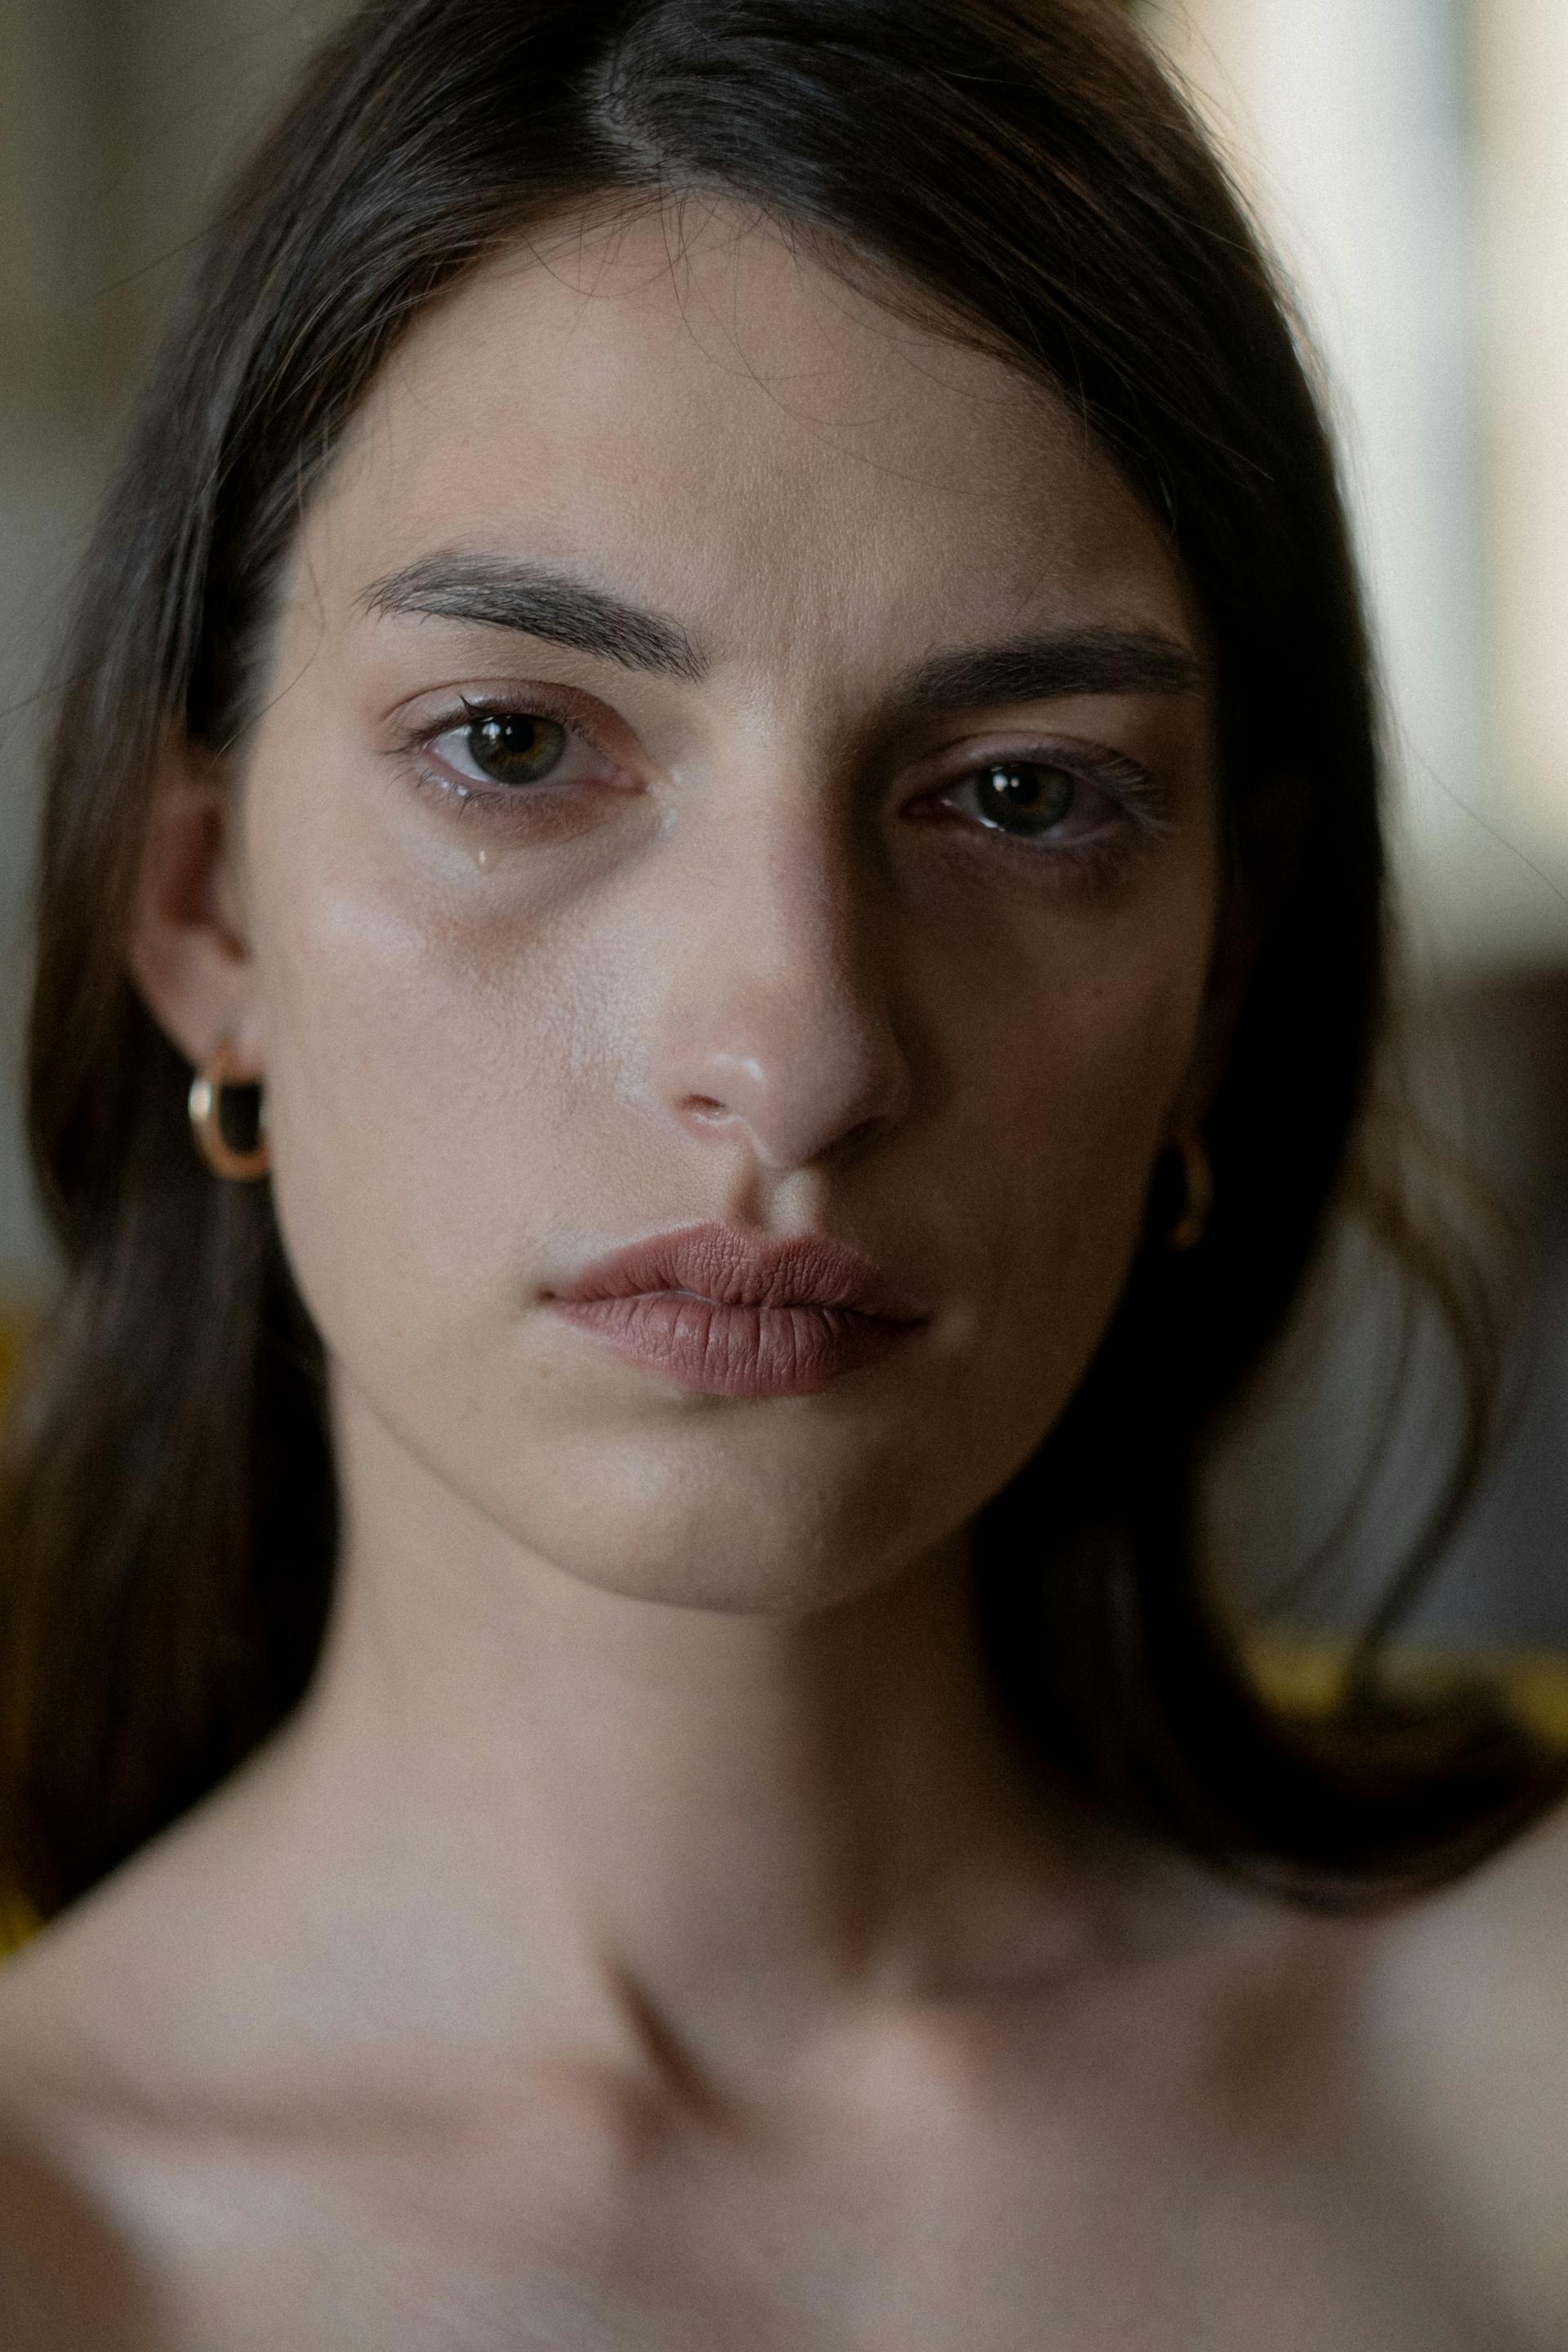 A woman with tears in her eyes | Source: Pexels